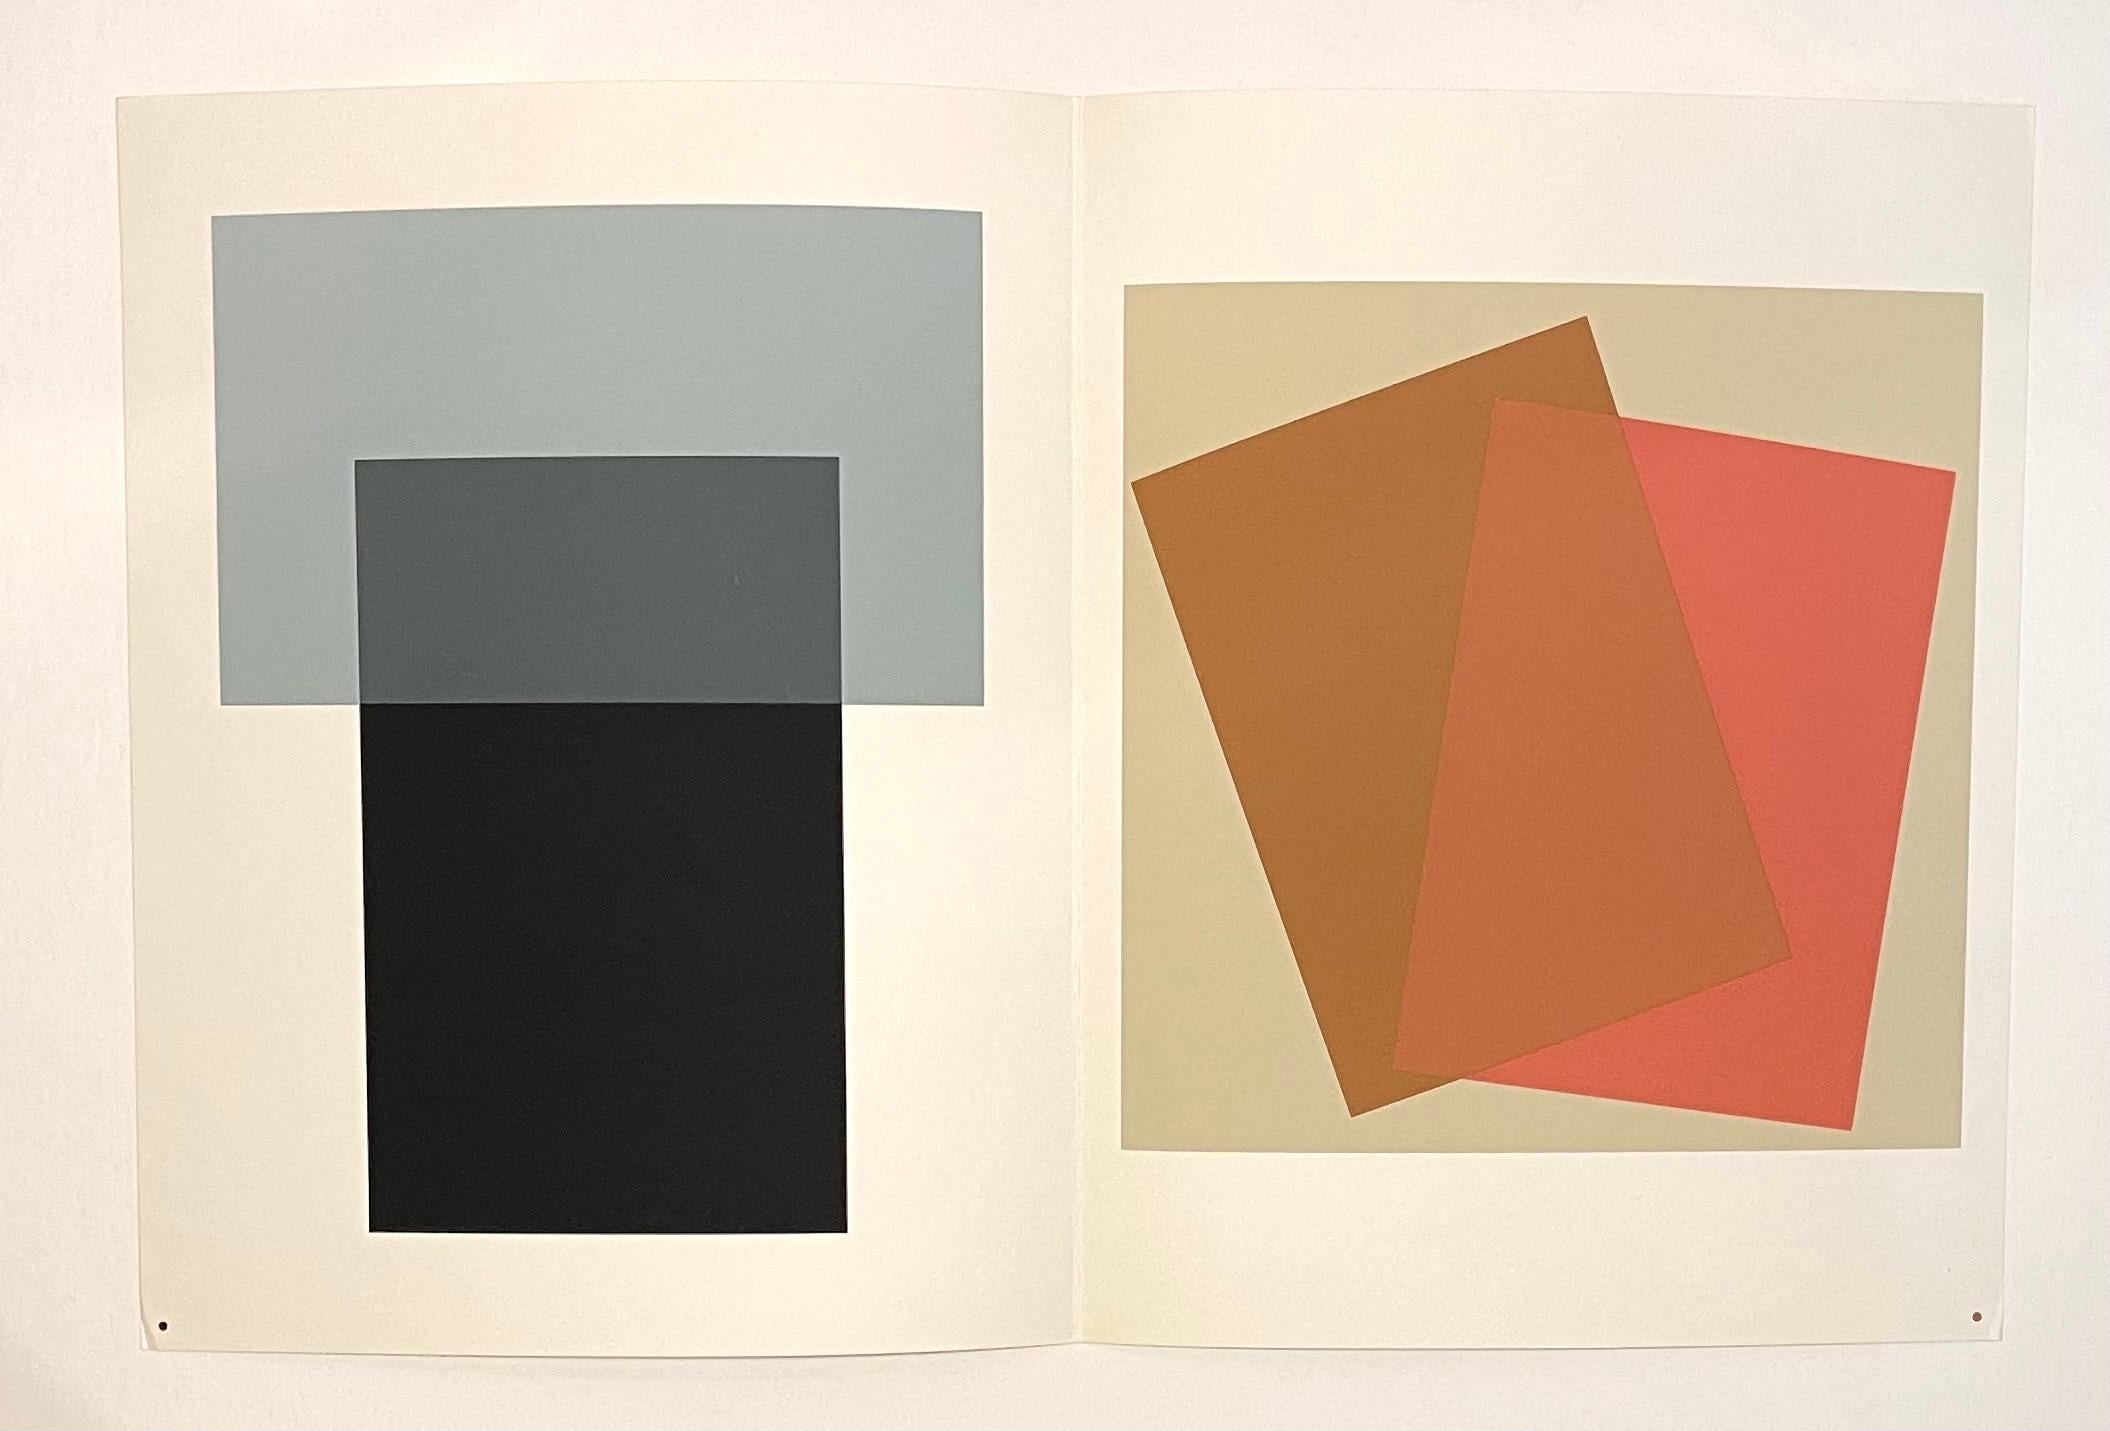 Albers, Josef). THE INTERACTION OF COLOR by Josef Albers. Yale University Press, New Haven, 1963. 
Edition of 2000 copies, of which this is one 50 signed and numbered by Albers. Large quarto (about 14 x 11 inches). 
Signed and numbered 